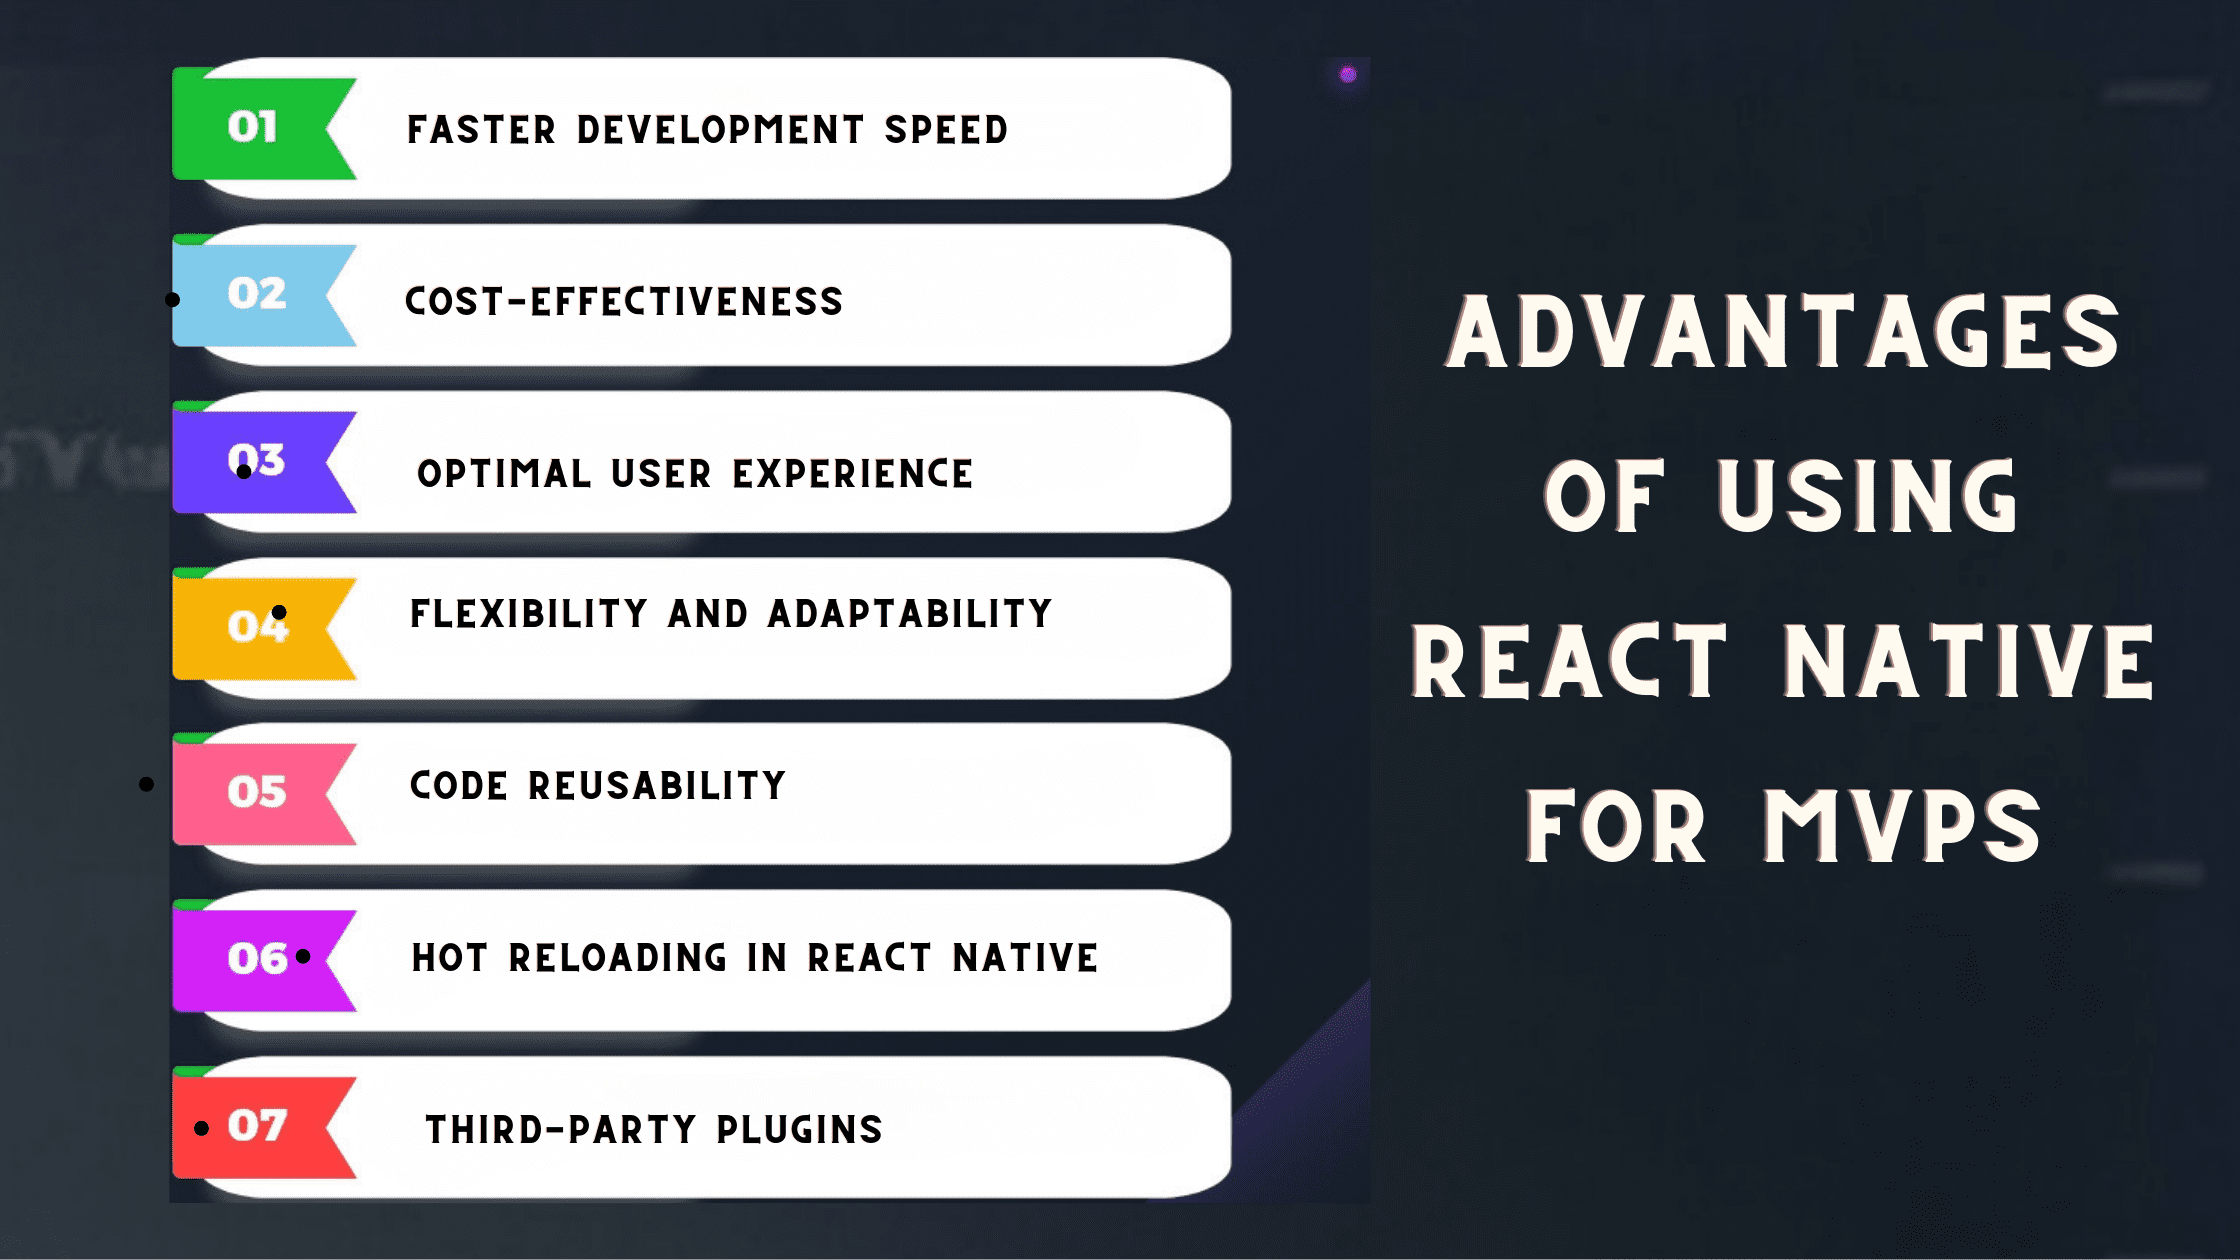 Advantages of Using React Native for MVPs